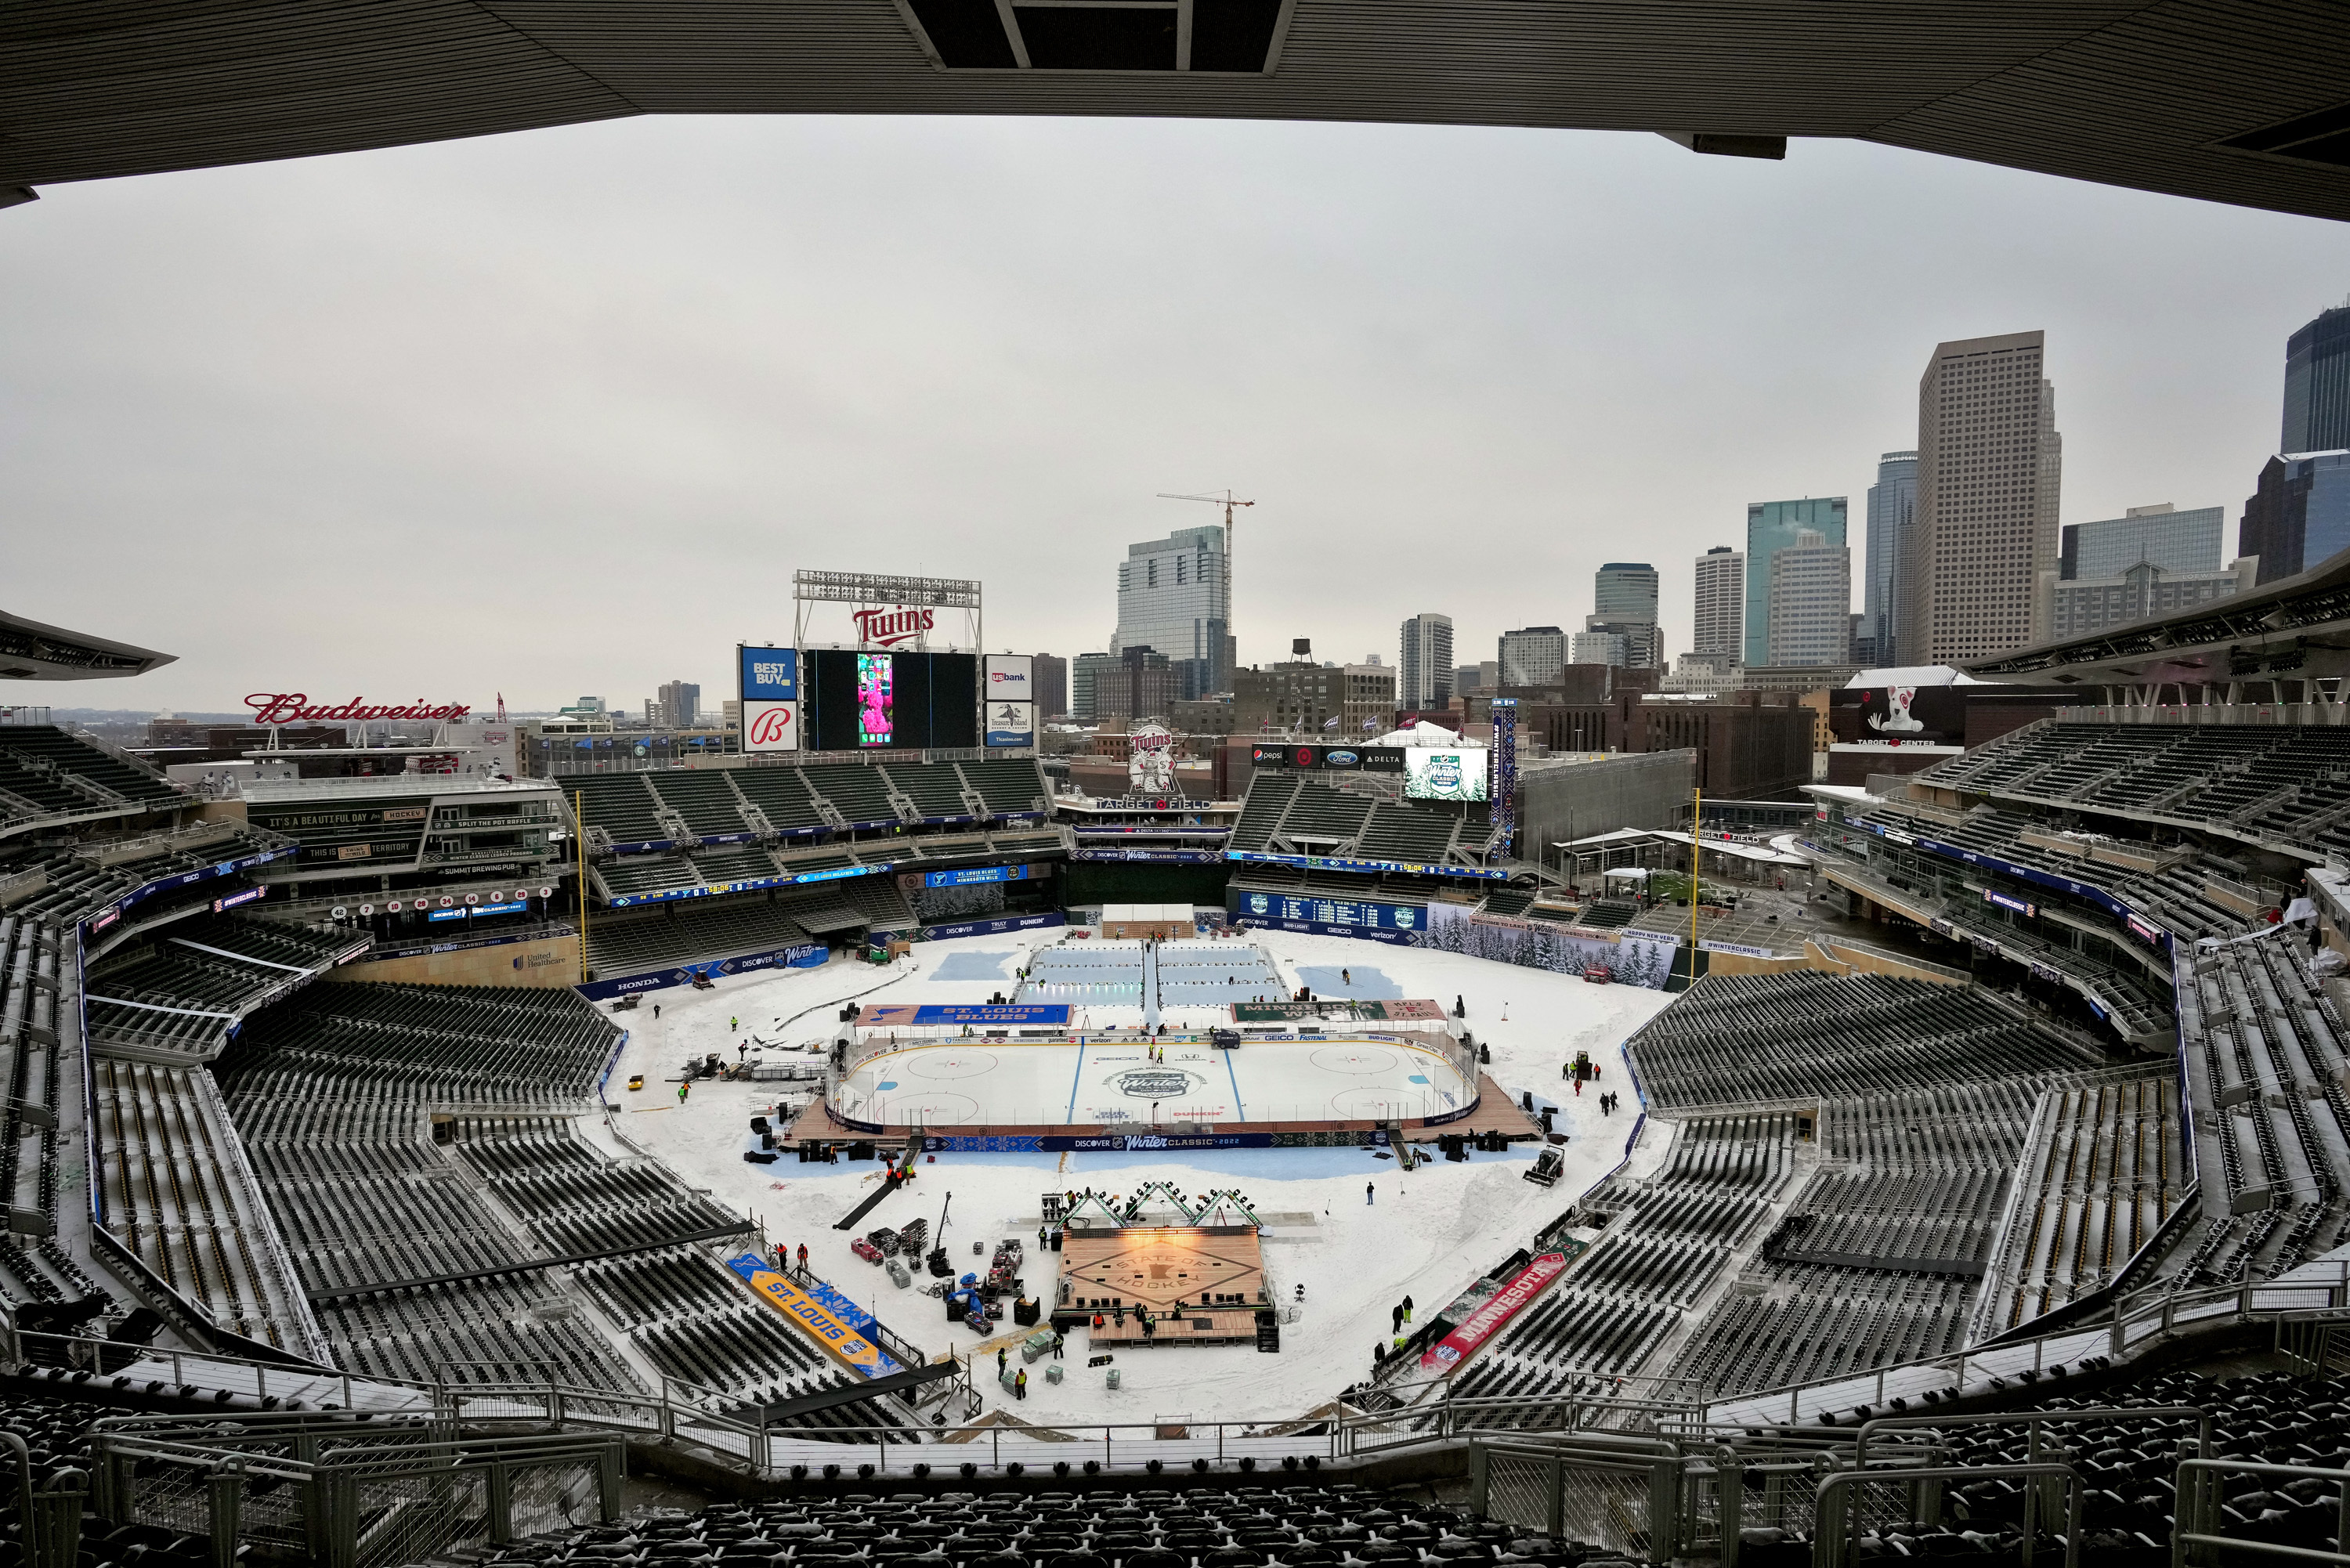 NHL.com] 2022 Winter Classic between Wild, Blues to be played at